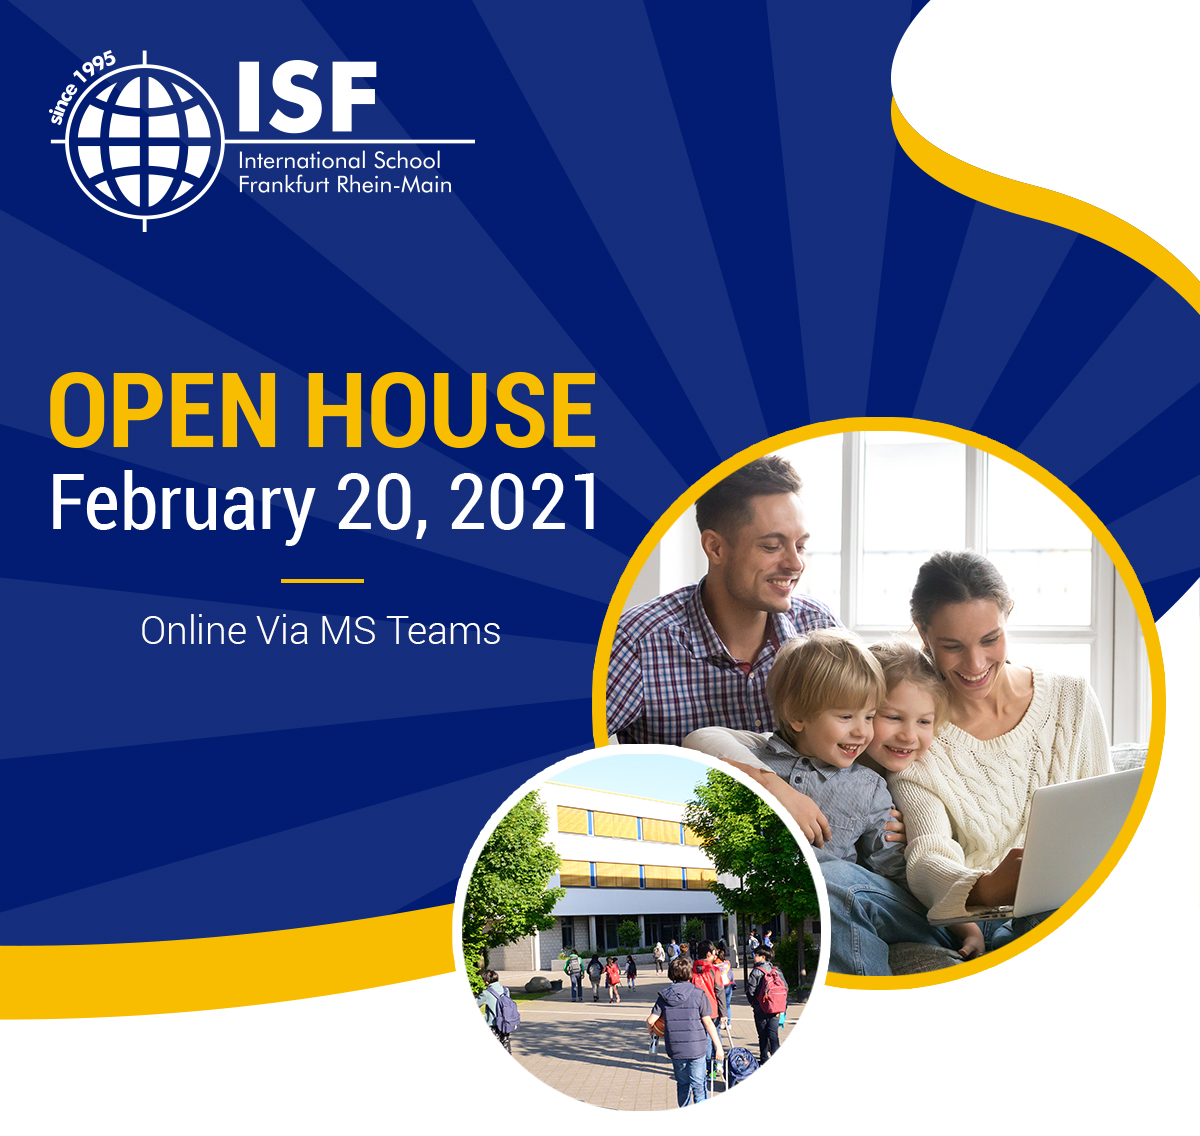 ISF Open House Banner - February 20, 2021 - Online Via MS Teams